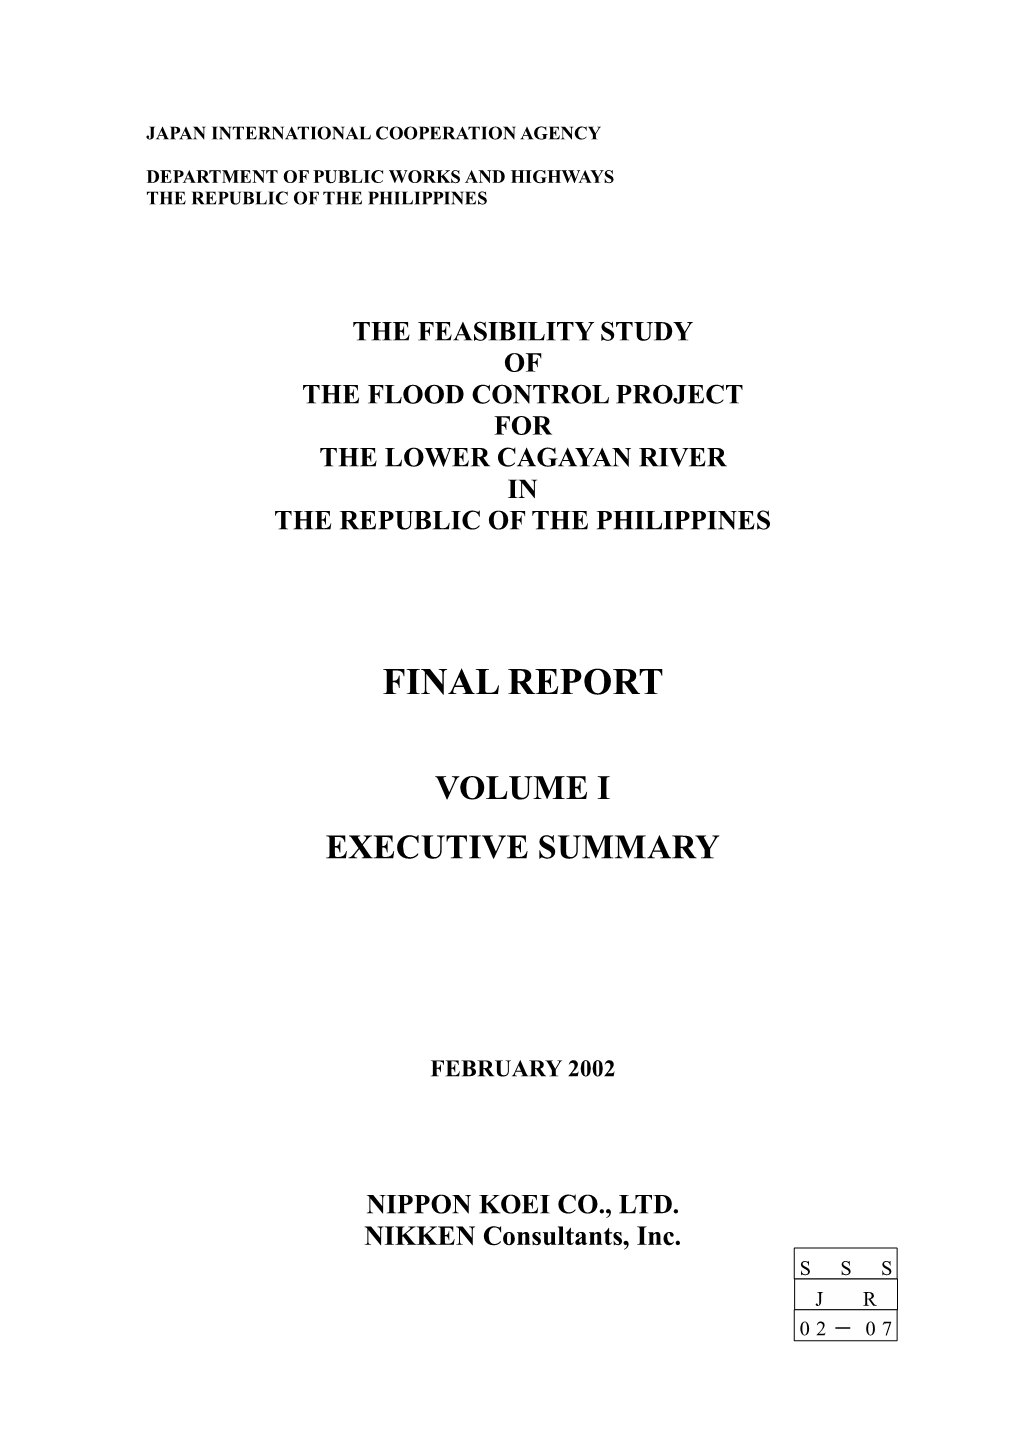 The Feasibility Study of the Flood Control Project for the Lower Cagayan River in the Republic of the Philippines